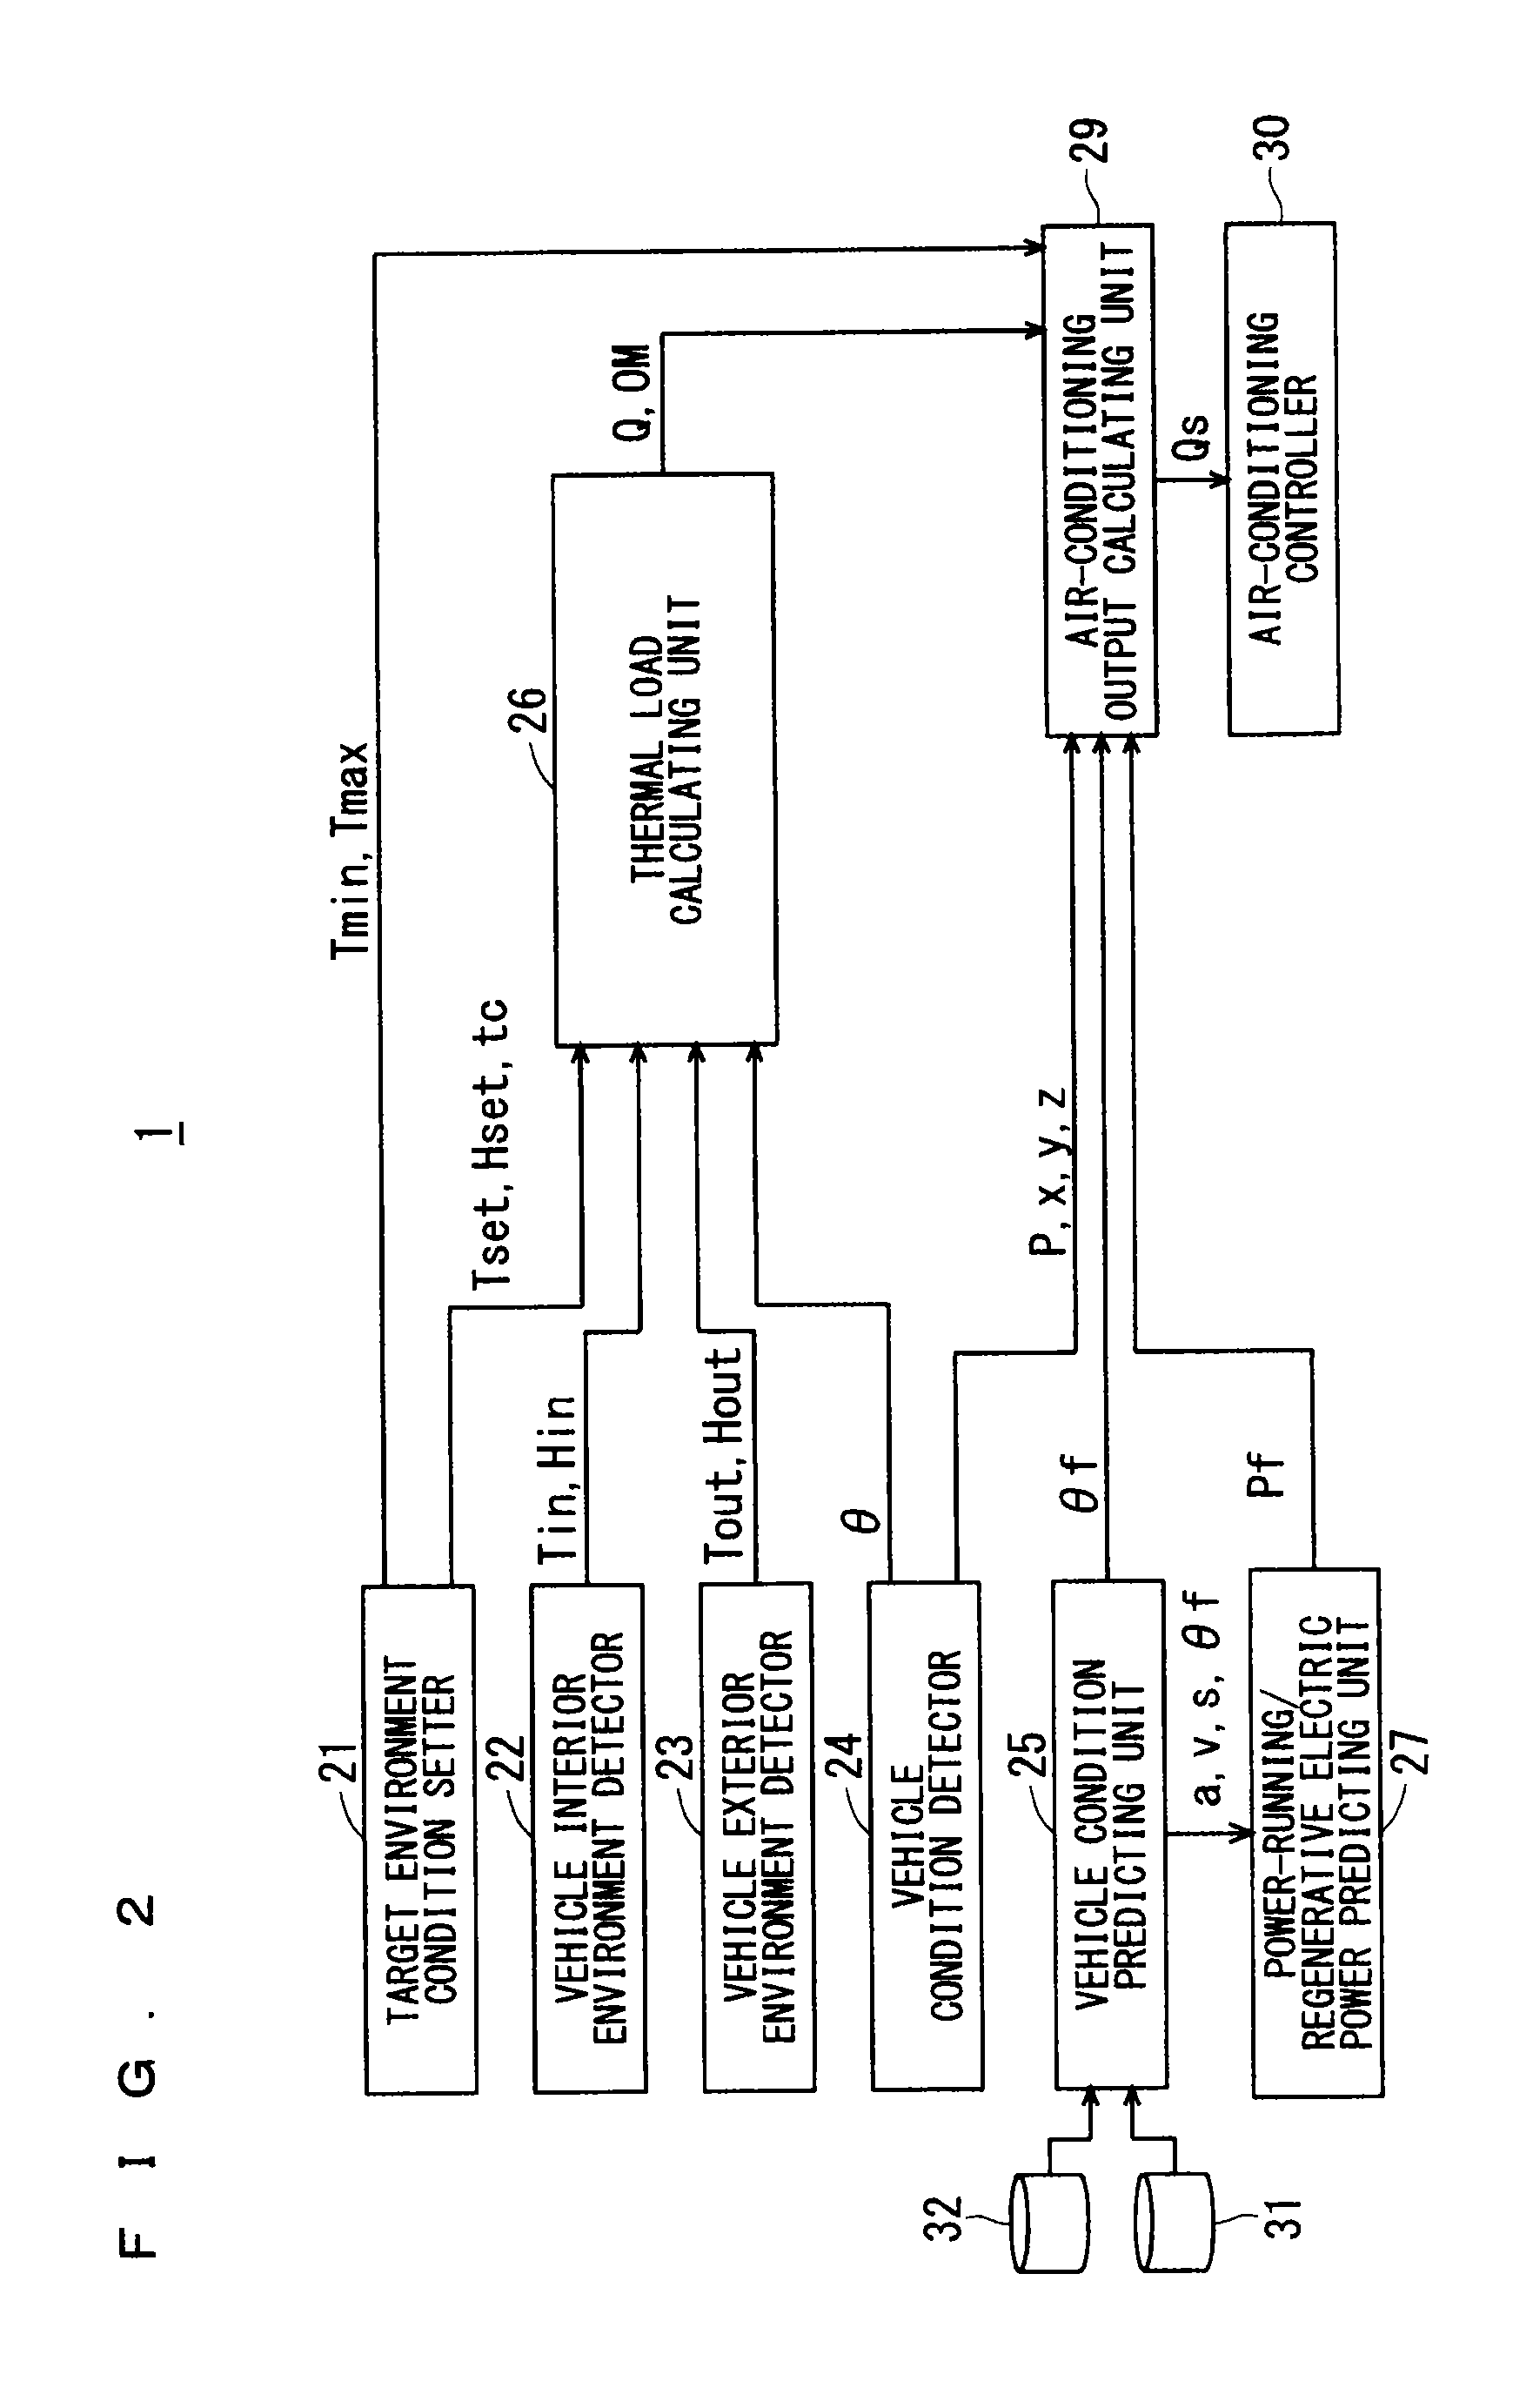 Vehicle air conditioning control device